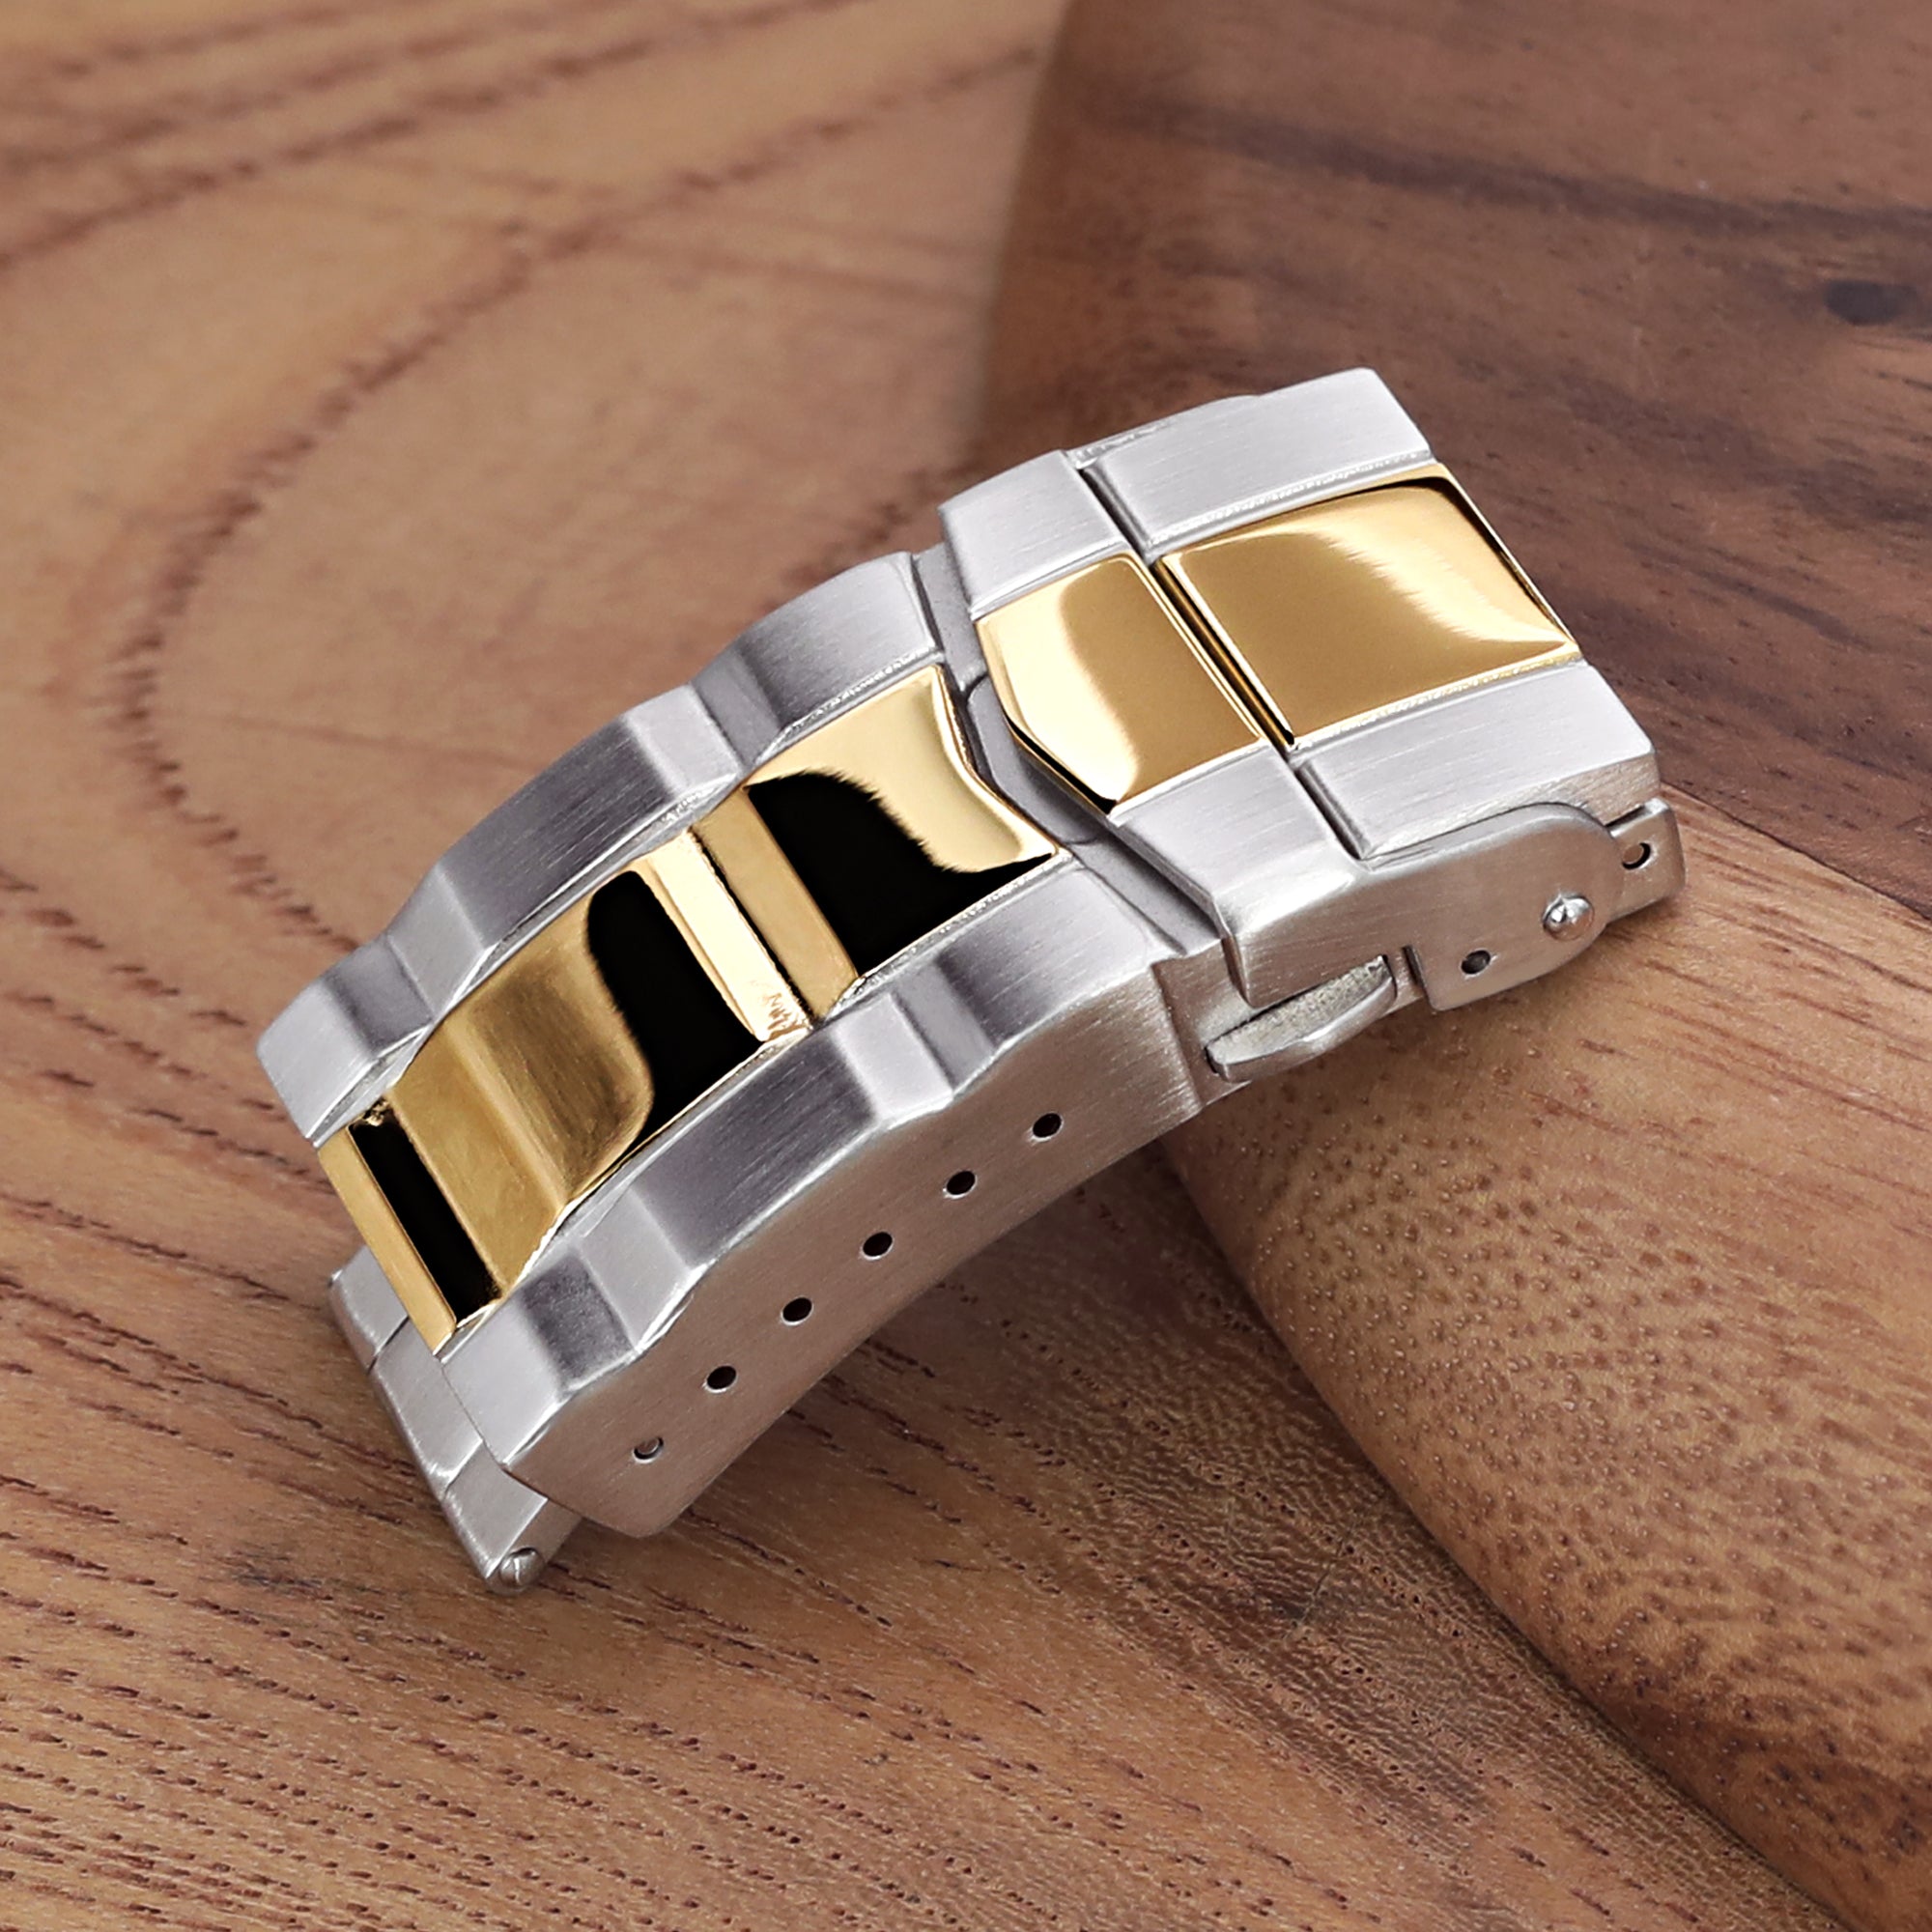 18mm Solid 316L Stainless Steel Double Locks SUB Diver Clasp Button Control 2-tone IP Polished Gold Strapcode Buckles